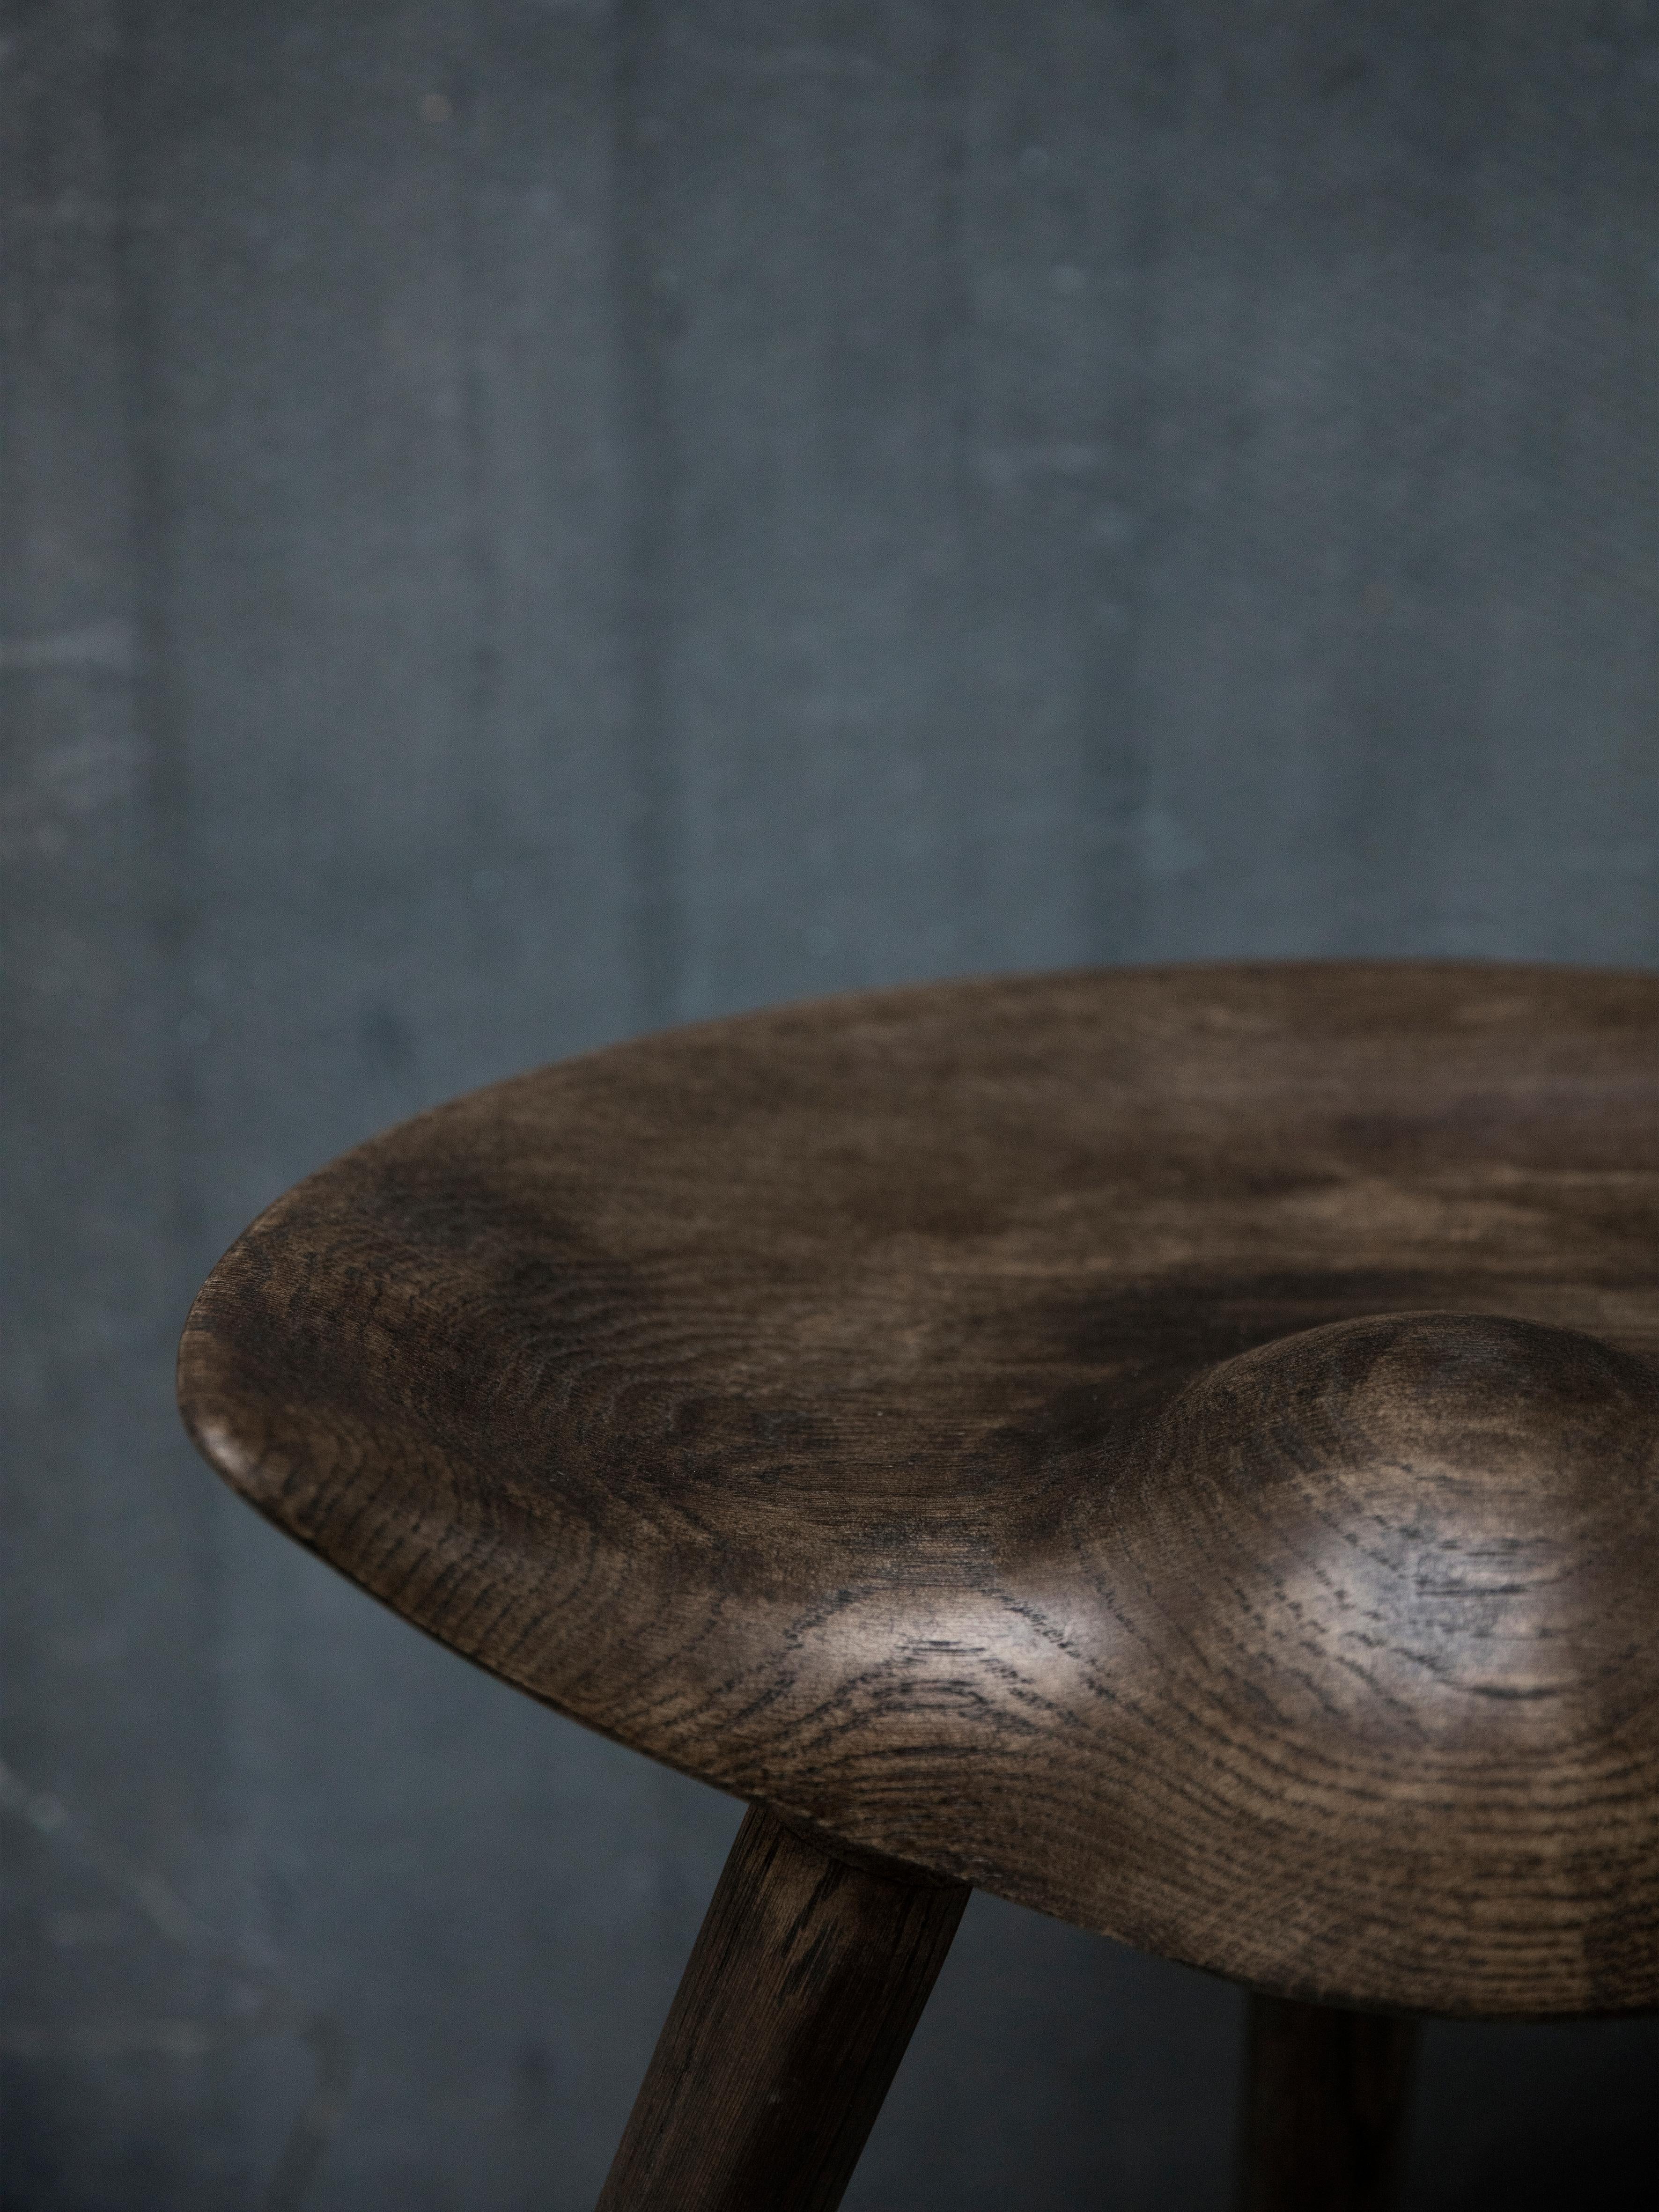 Brown oak stool by Lassen
Dimensions: H 48 x W 36 x L 55.5 cm
Materials: Oak

In 1942 Mogens Lassen designed the Stool ML42 as a piece for a furniture exhibition held at the Danish Museum of Decorative Art. He took inspiration from the stools